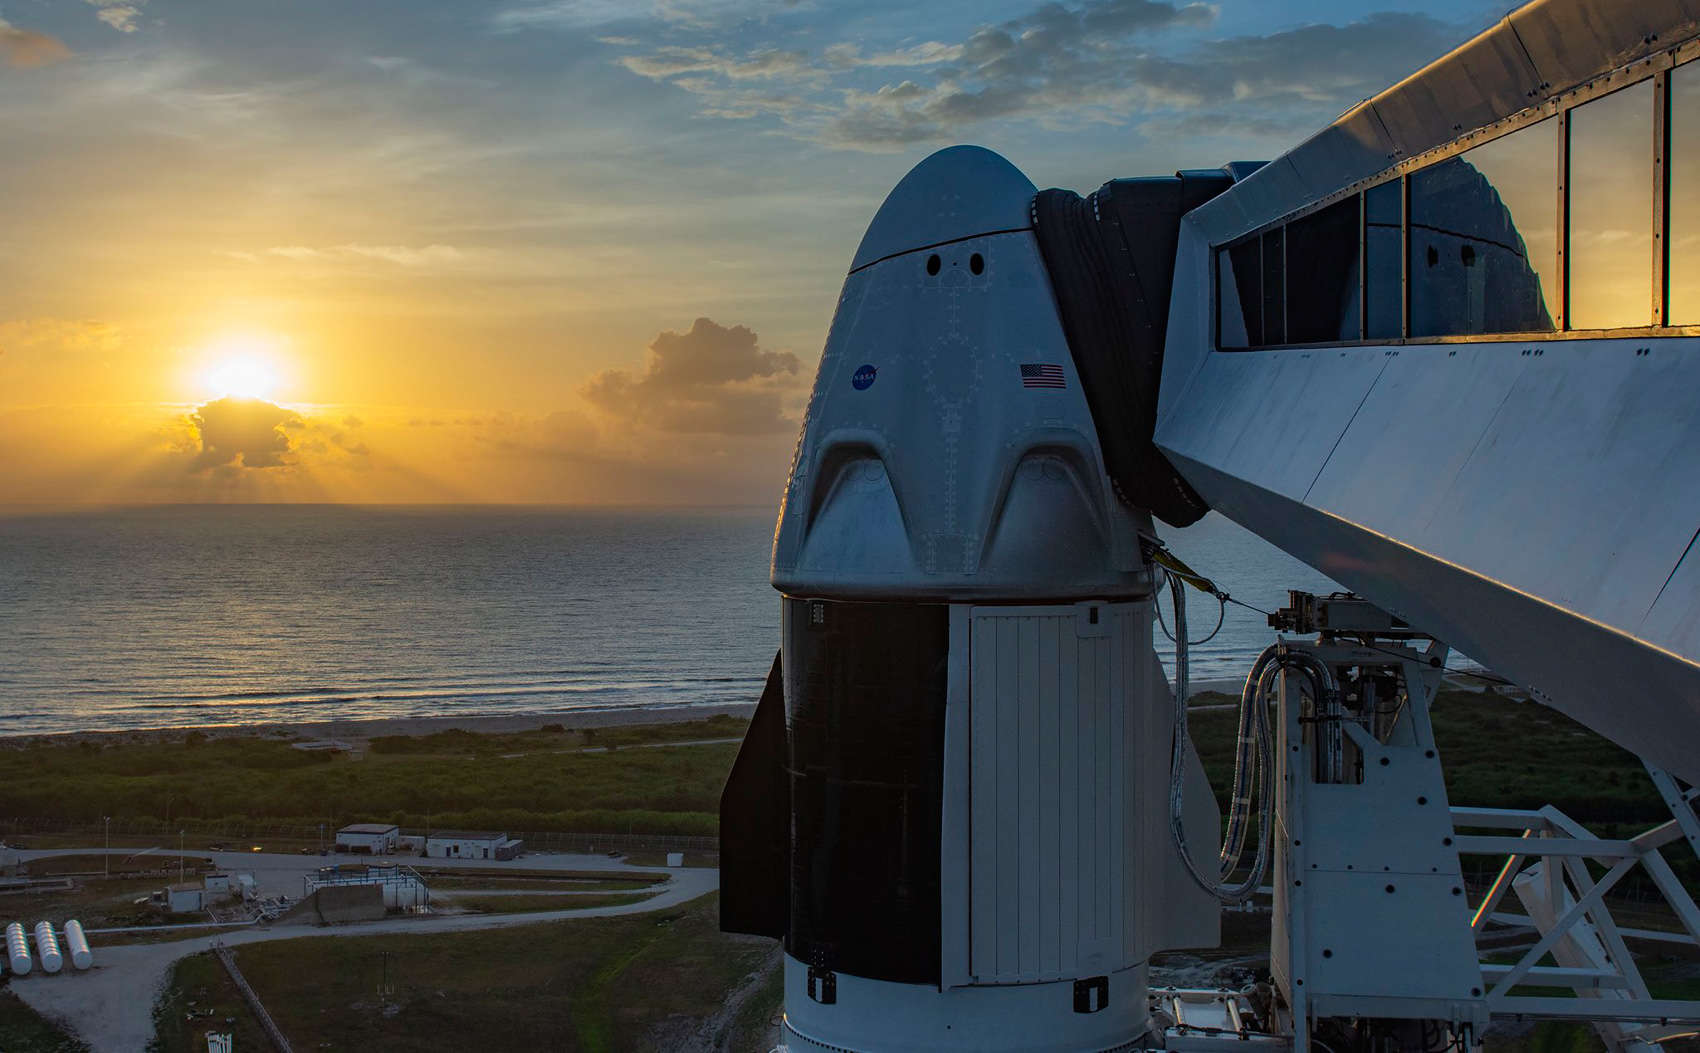 The Sun rises on the Crew Dragon atop a Falcon 9 in the shortly before the Demo-2 launch, returning American astronauts to space from American soil. Credit: SpaceX